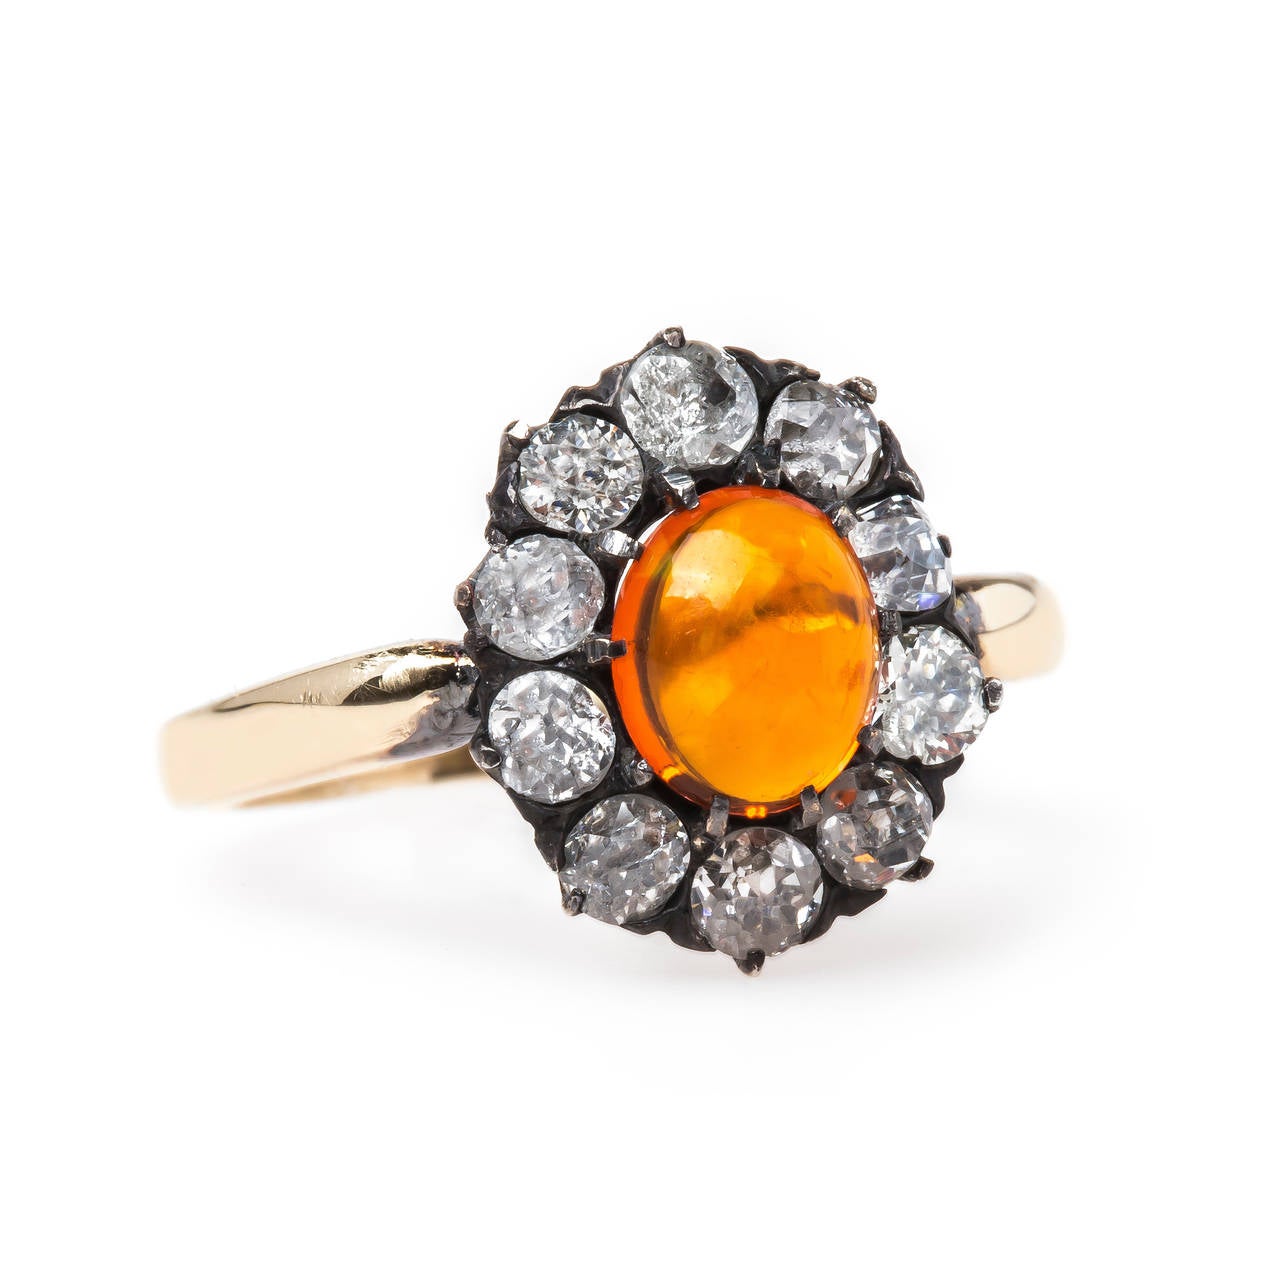 Orange Grove is a dazzling authentic Victorian (circa 1880) era silver topped 14k yellow gold ring centering an oval Cabochon fire opal gauged at 0.55ct. The gleaming stone is framed by a sparkling halo of ten Old Mine Cut diamonds totaling